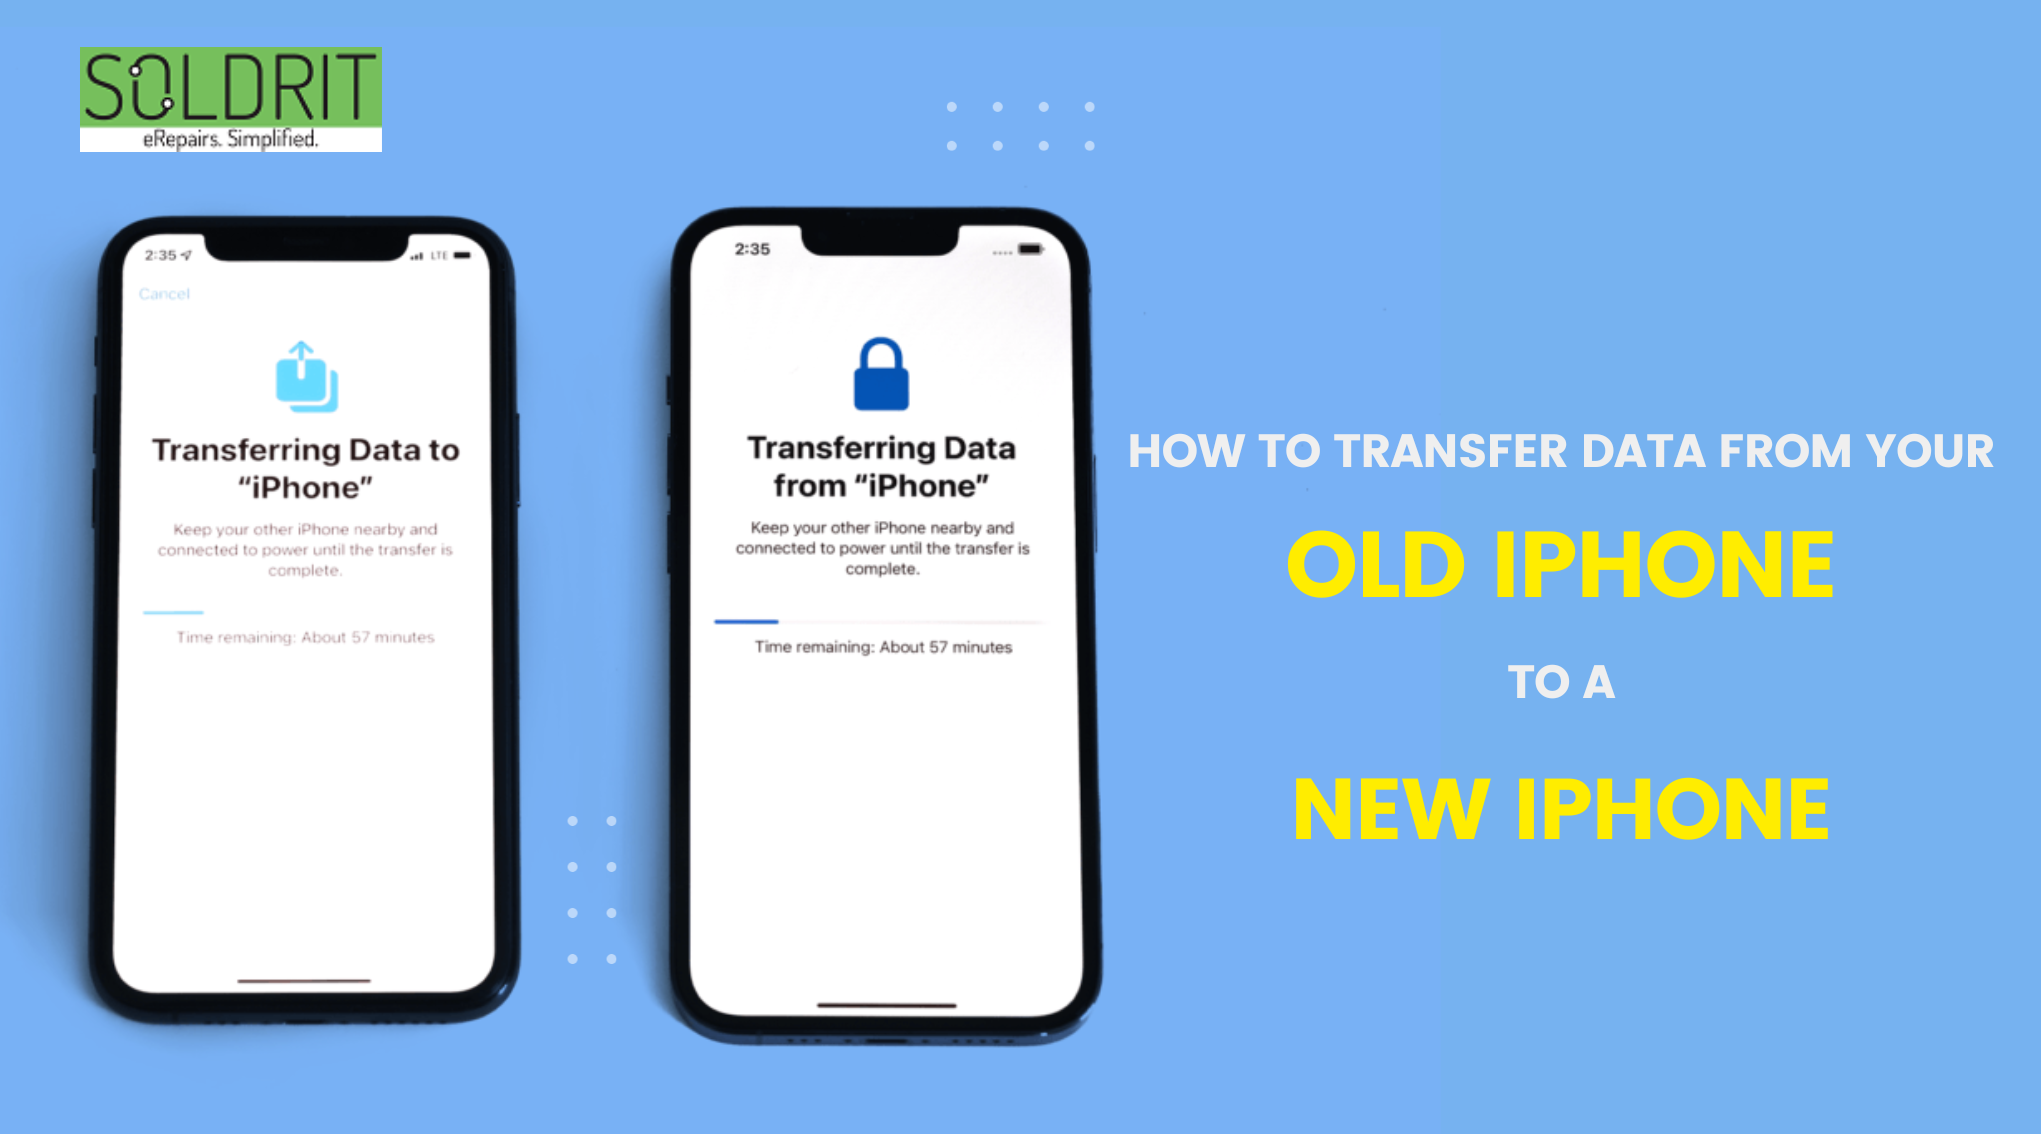 How to transfer data from your old iPhone to a new iPhone